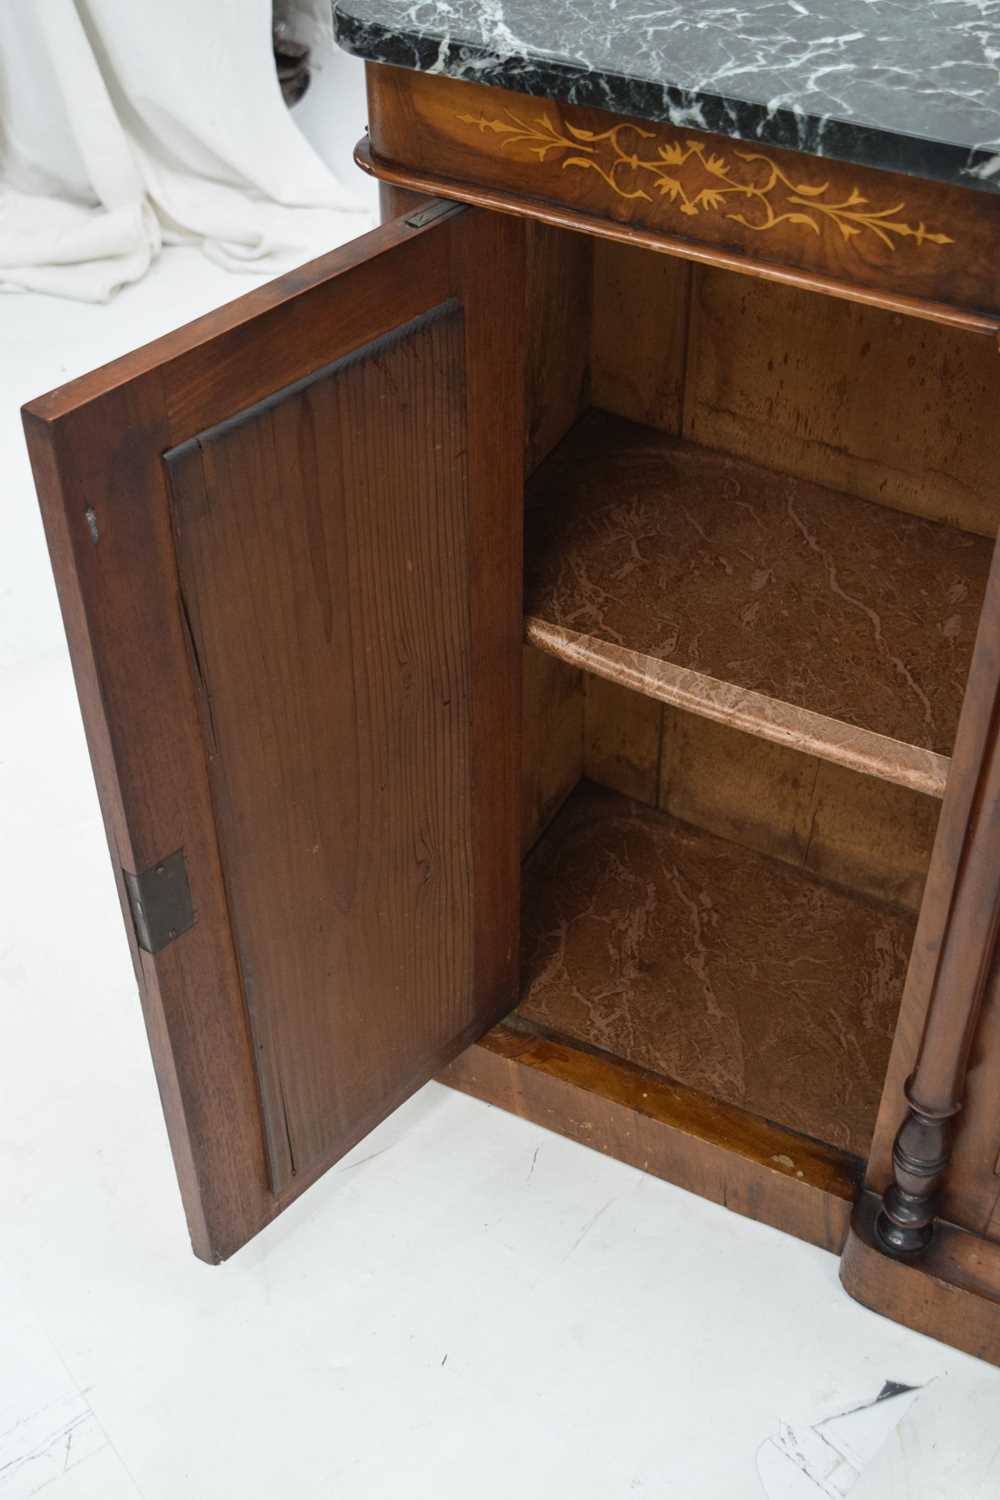 19th century inlaid walnut breakfront credenza or side cabinet with marble top - Image 9 of 13